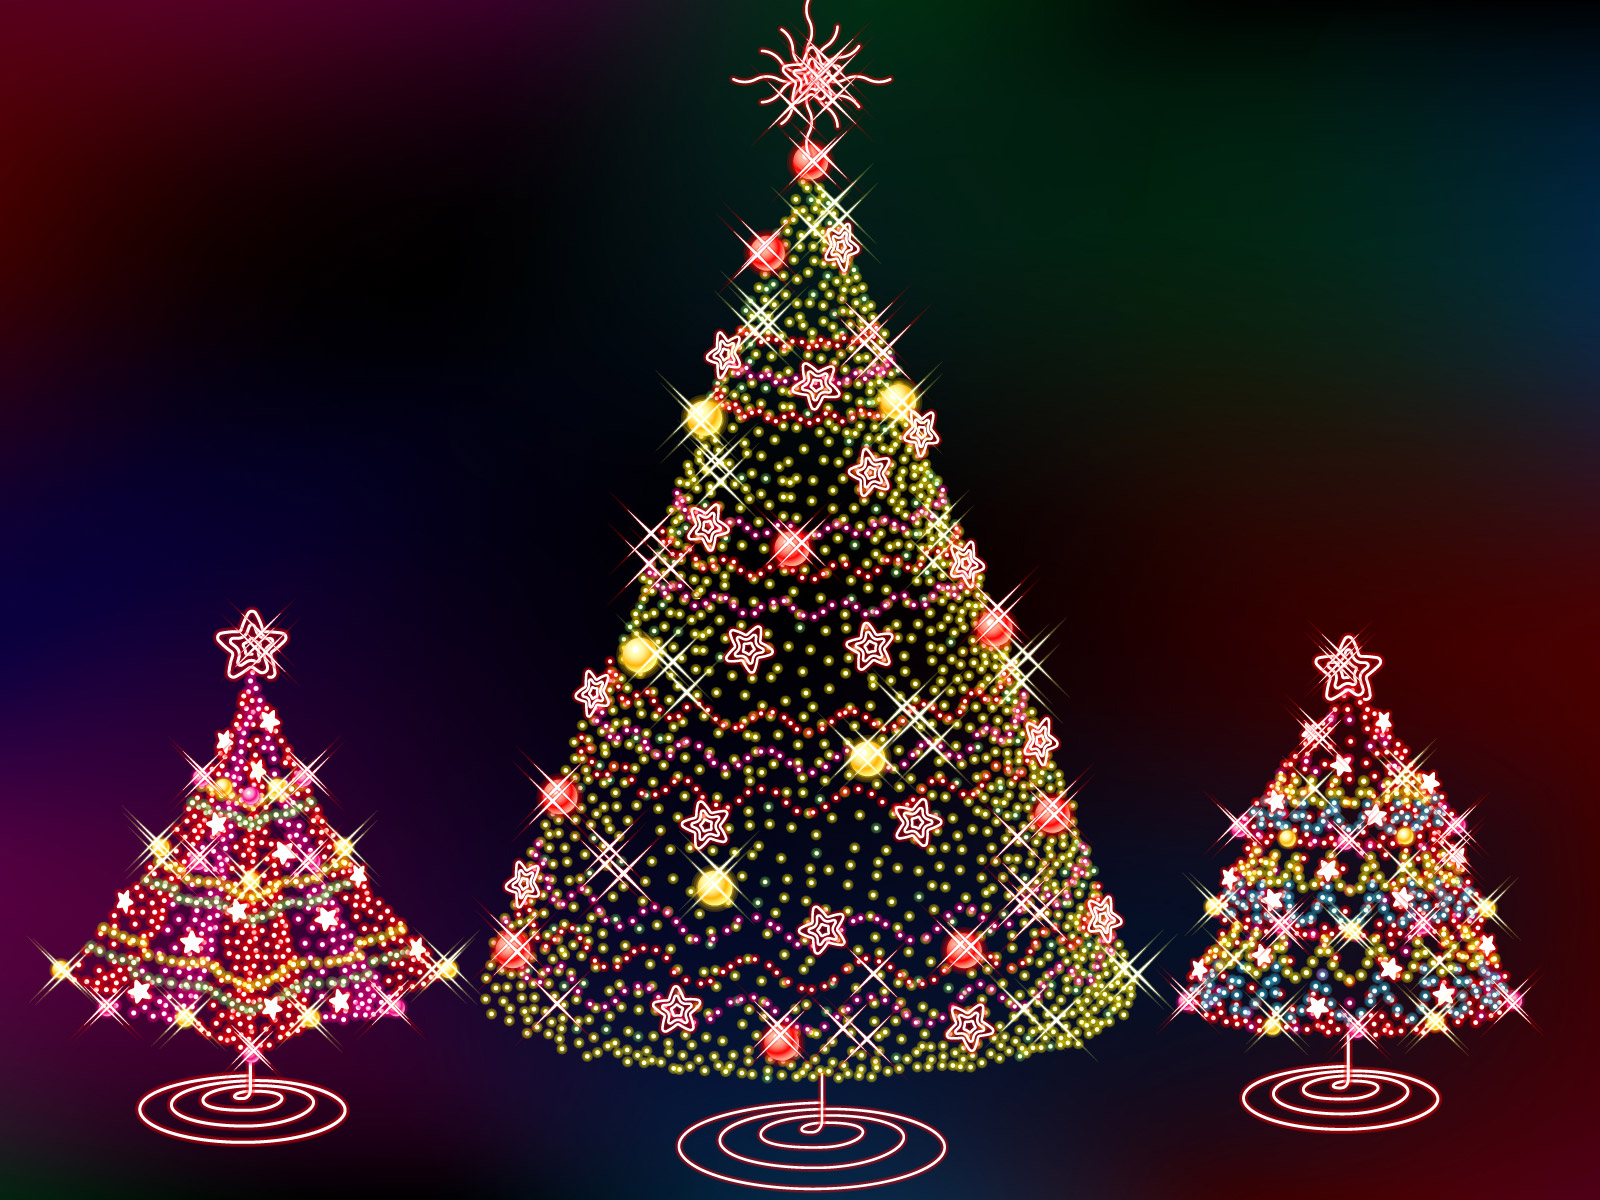 Gallery Free Christmas Wallpapers